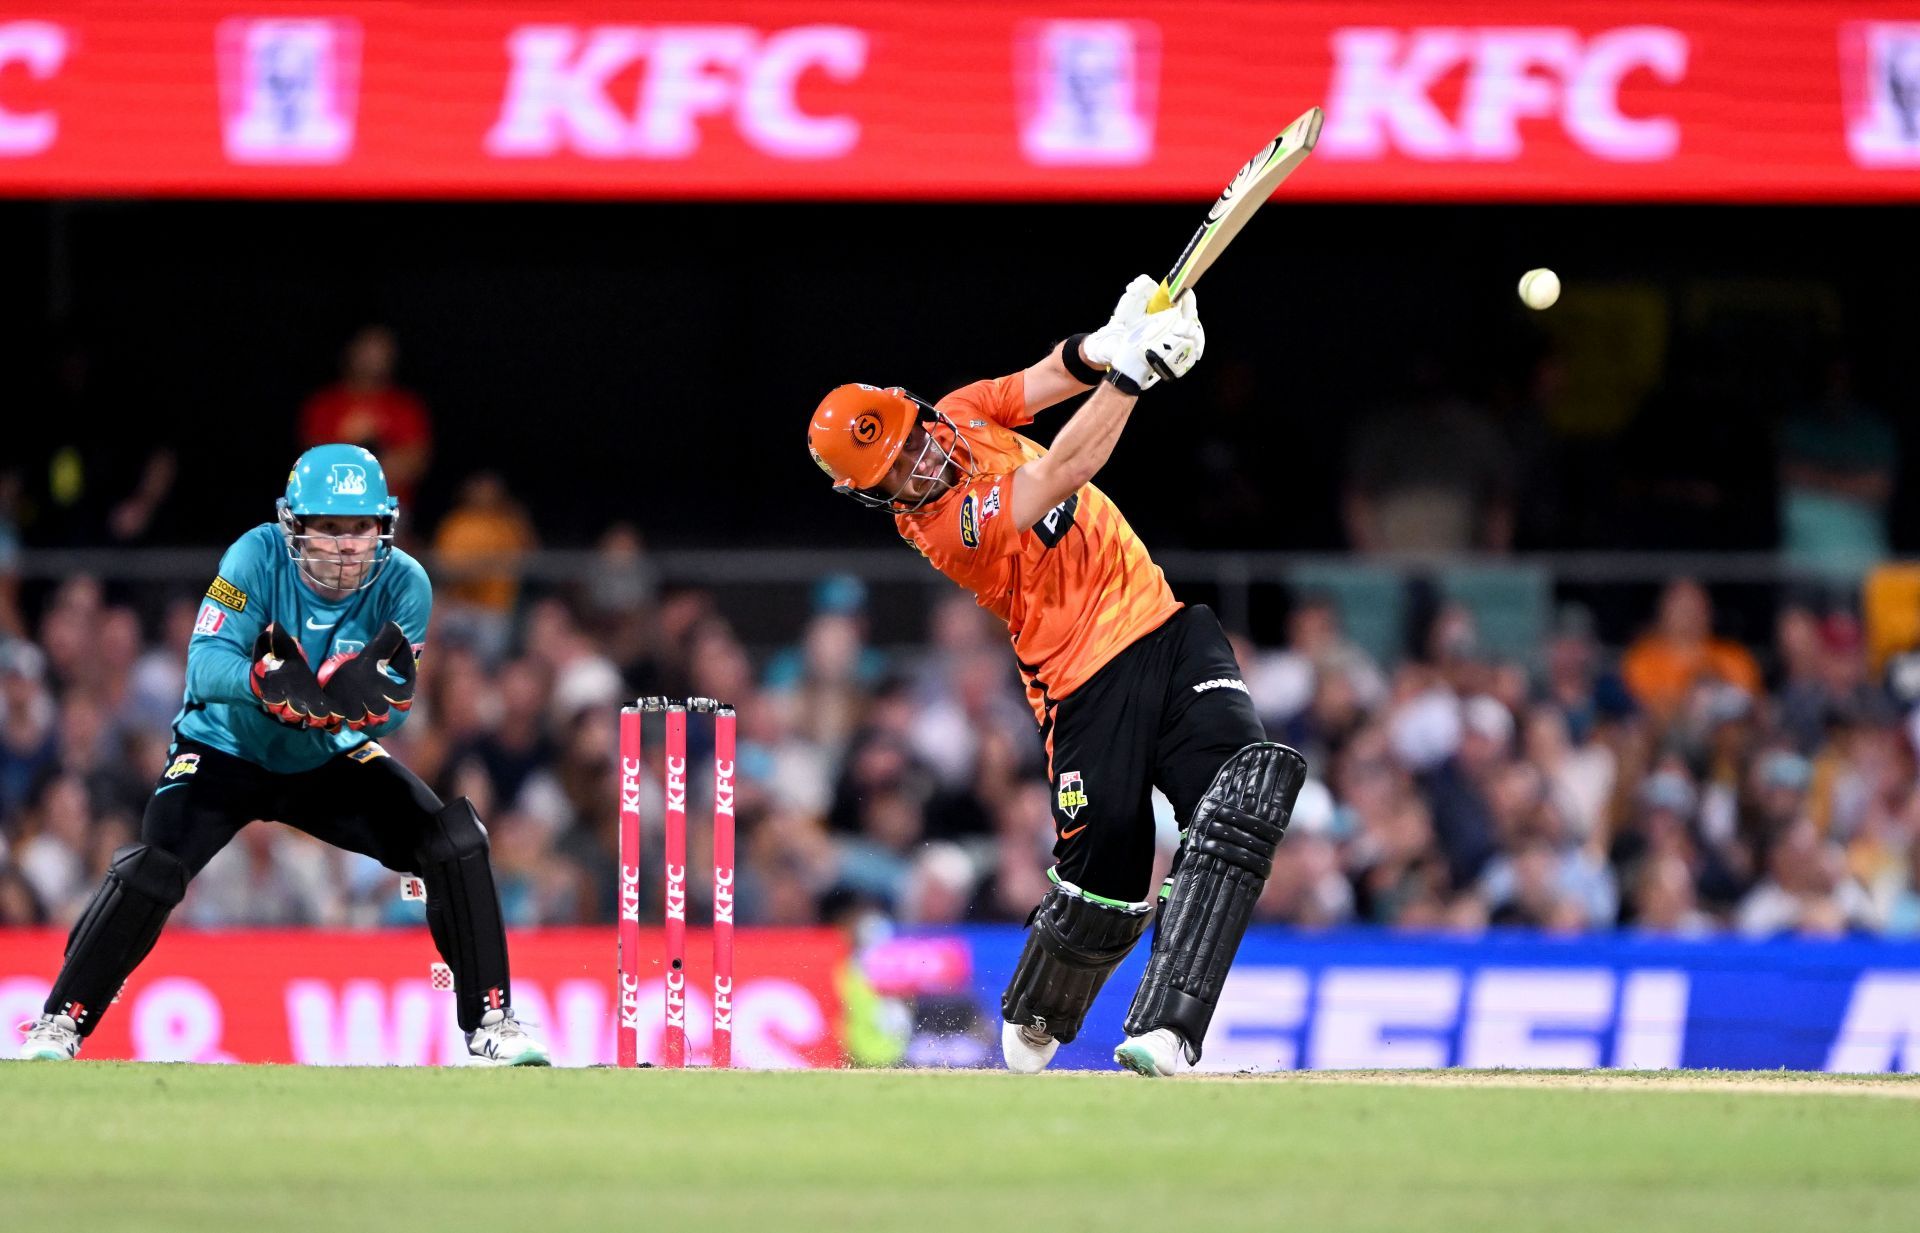 Inglis has been used as a floater by Perth Scorchers